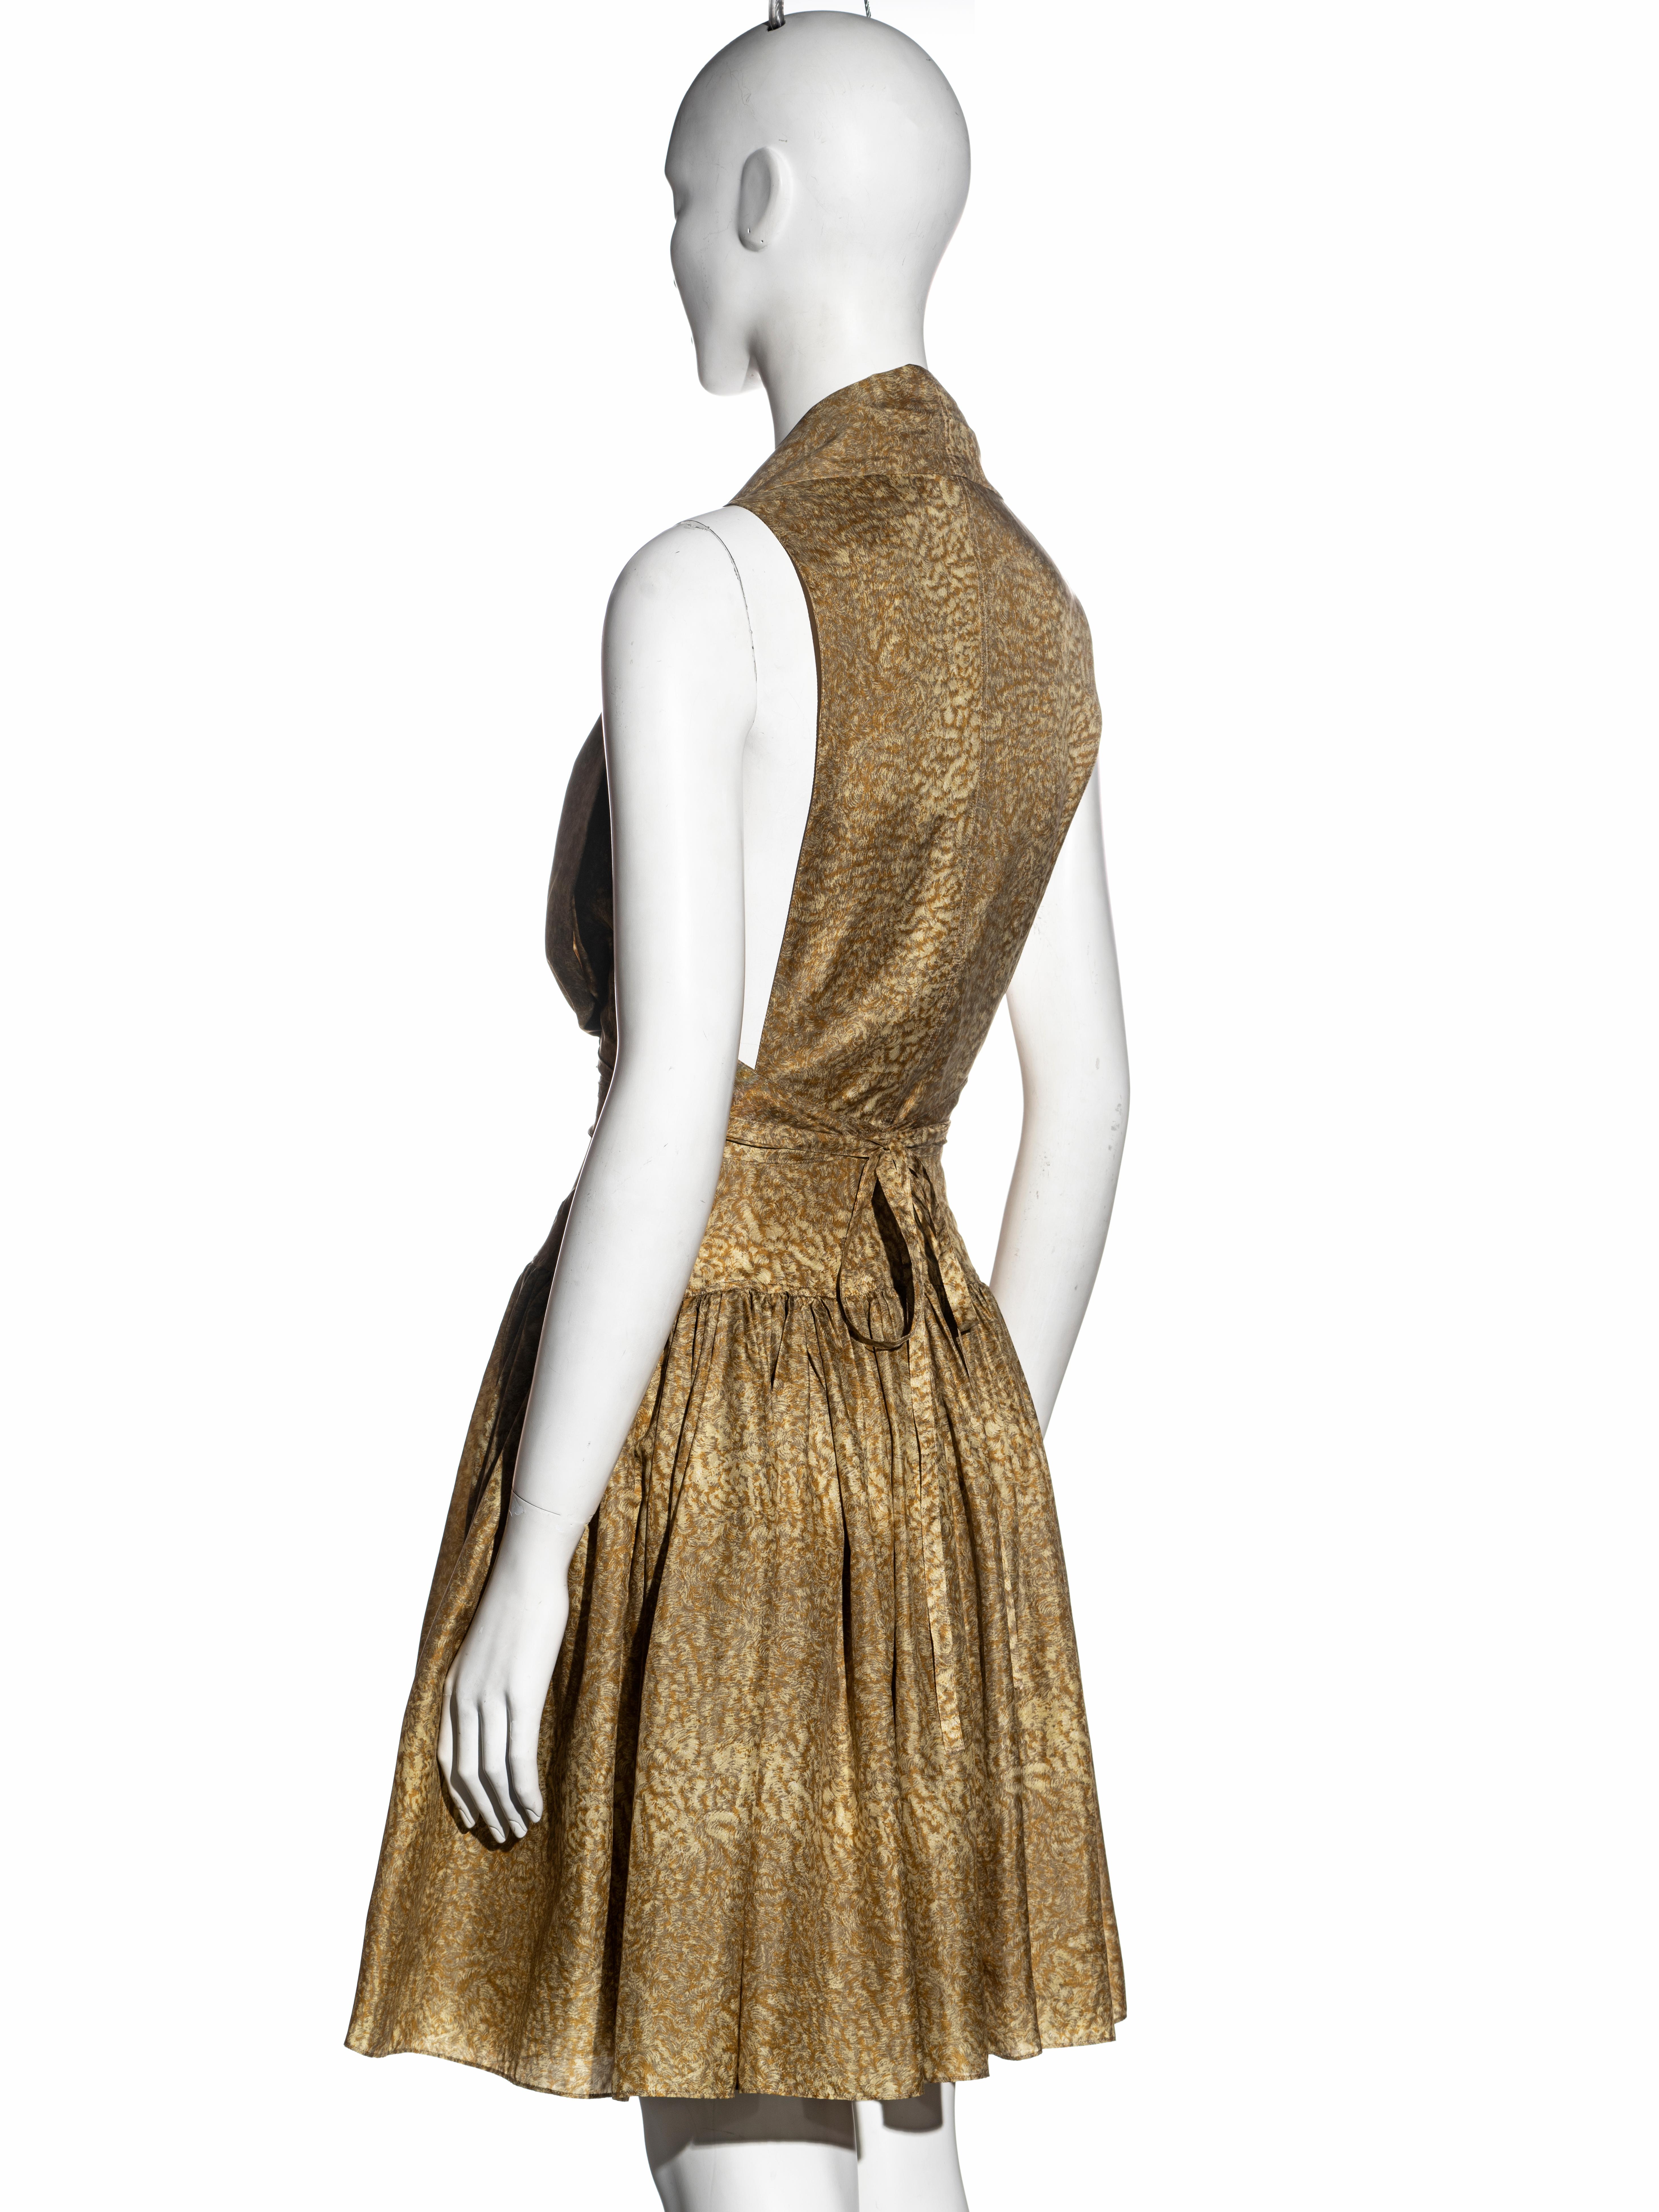 Azzedine Alaia gold printed silk evening dress, ss 1987 For Sale 7